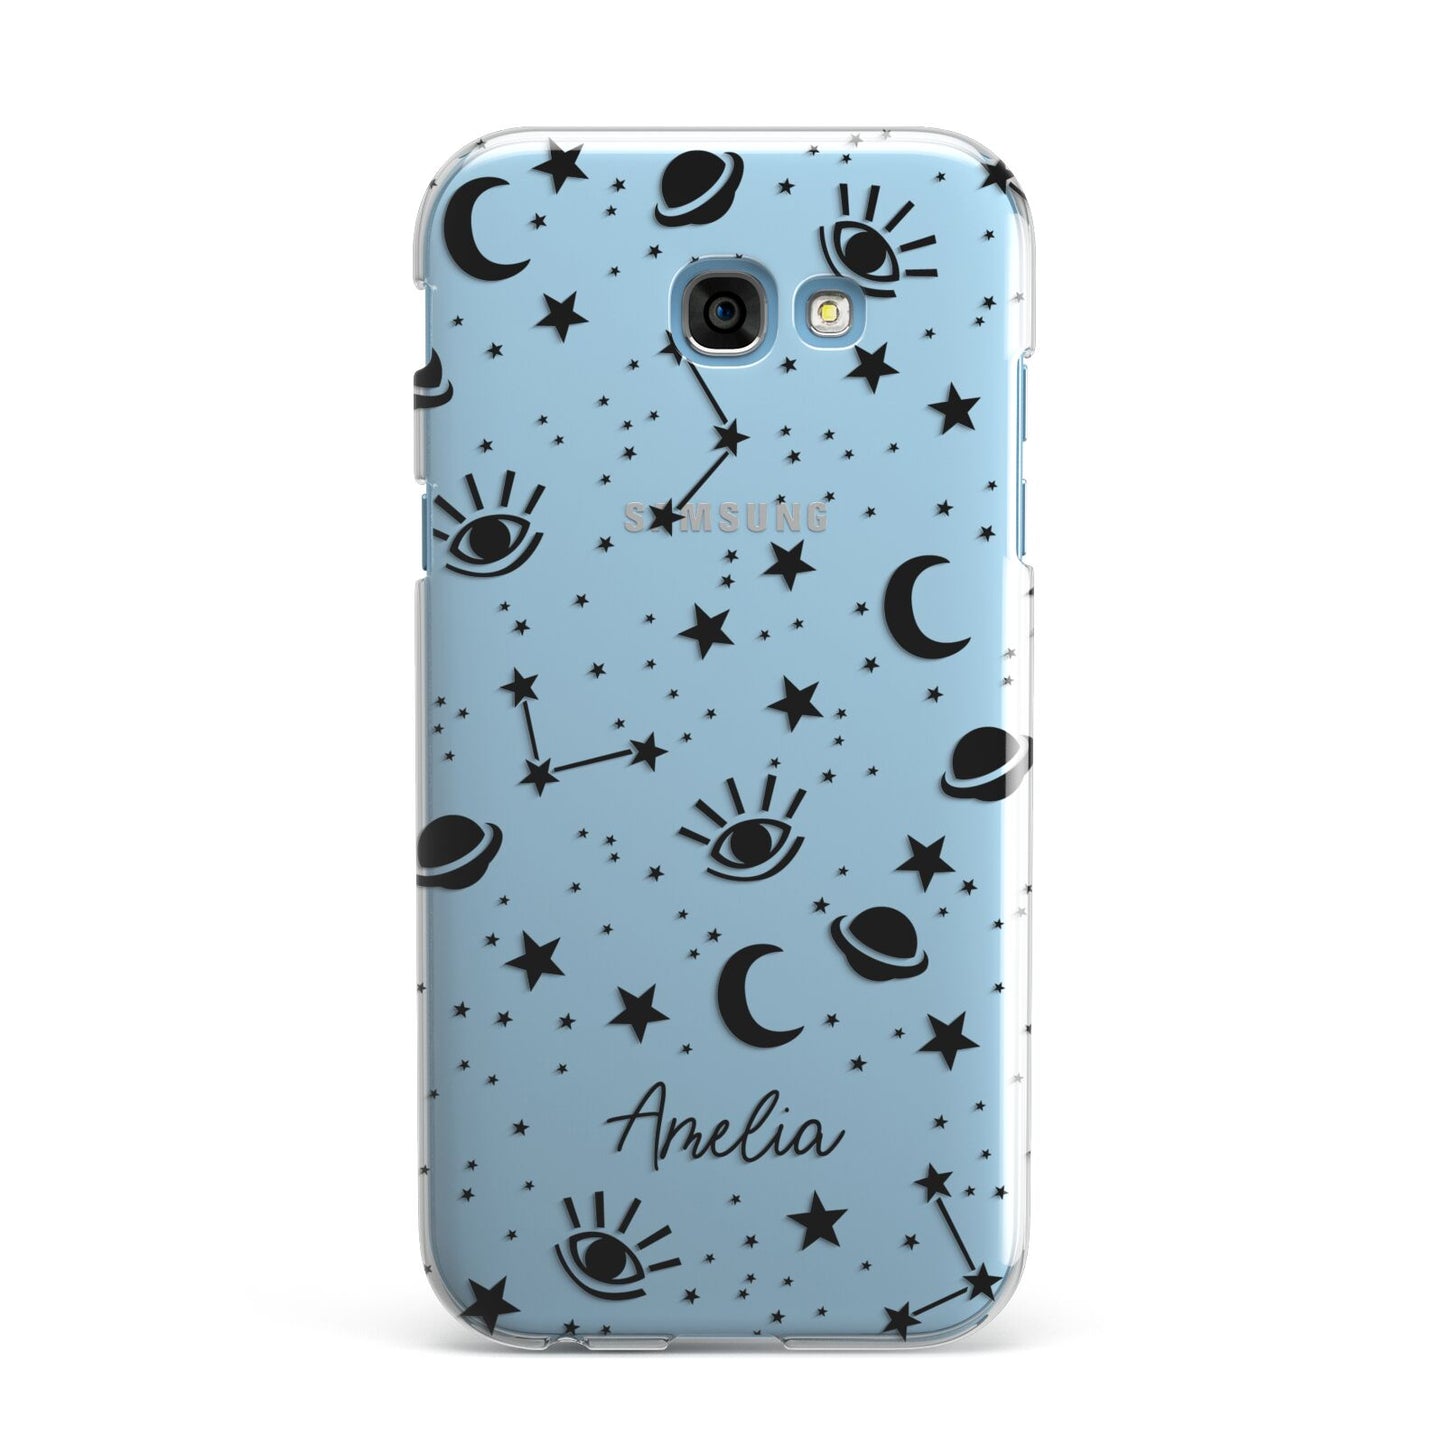 Monochrome Zodiac Constellations with Name Samsung Galaxy A7 2017 Case